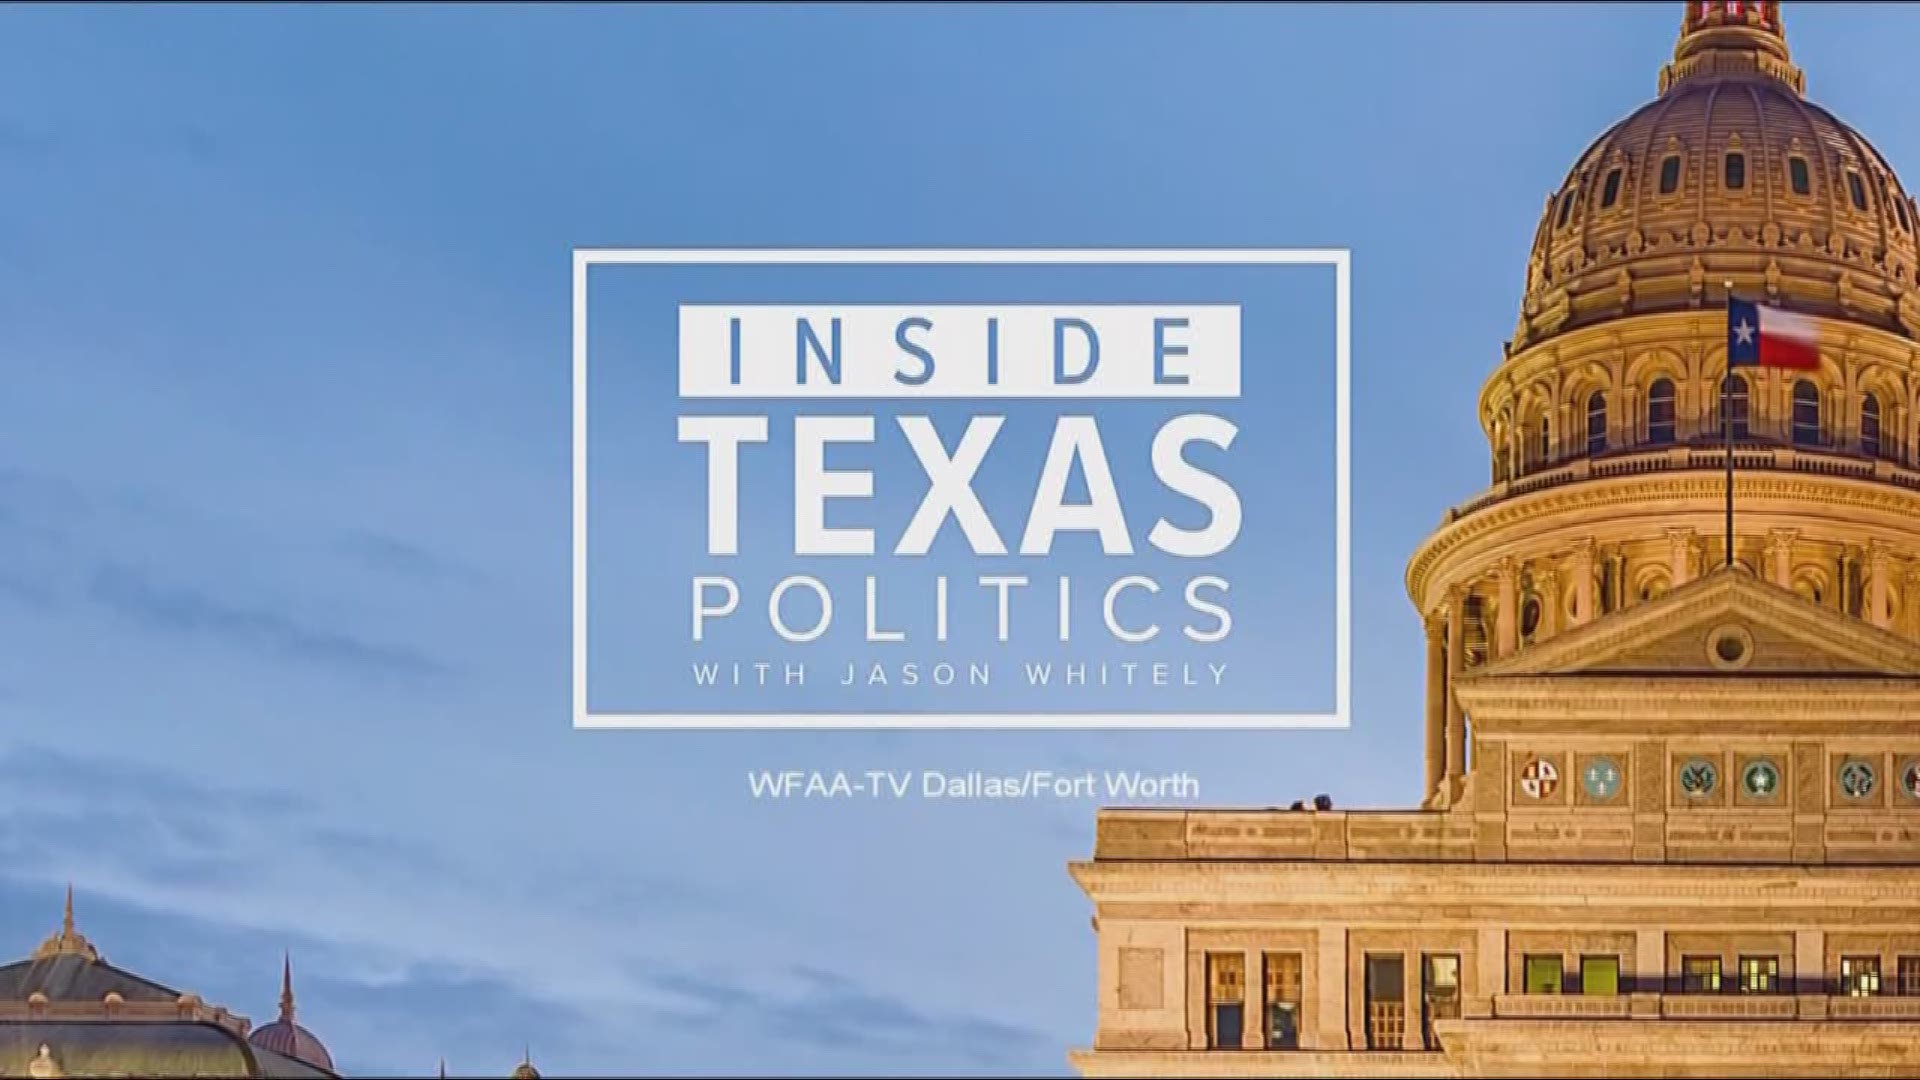 Inside Texas Politics began with Democratic State Senator Royce West in studio to discuss the changes needed in Senate Bill 30 (SB30) - commonly referred to as the Community Education Act.